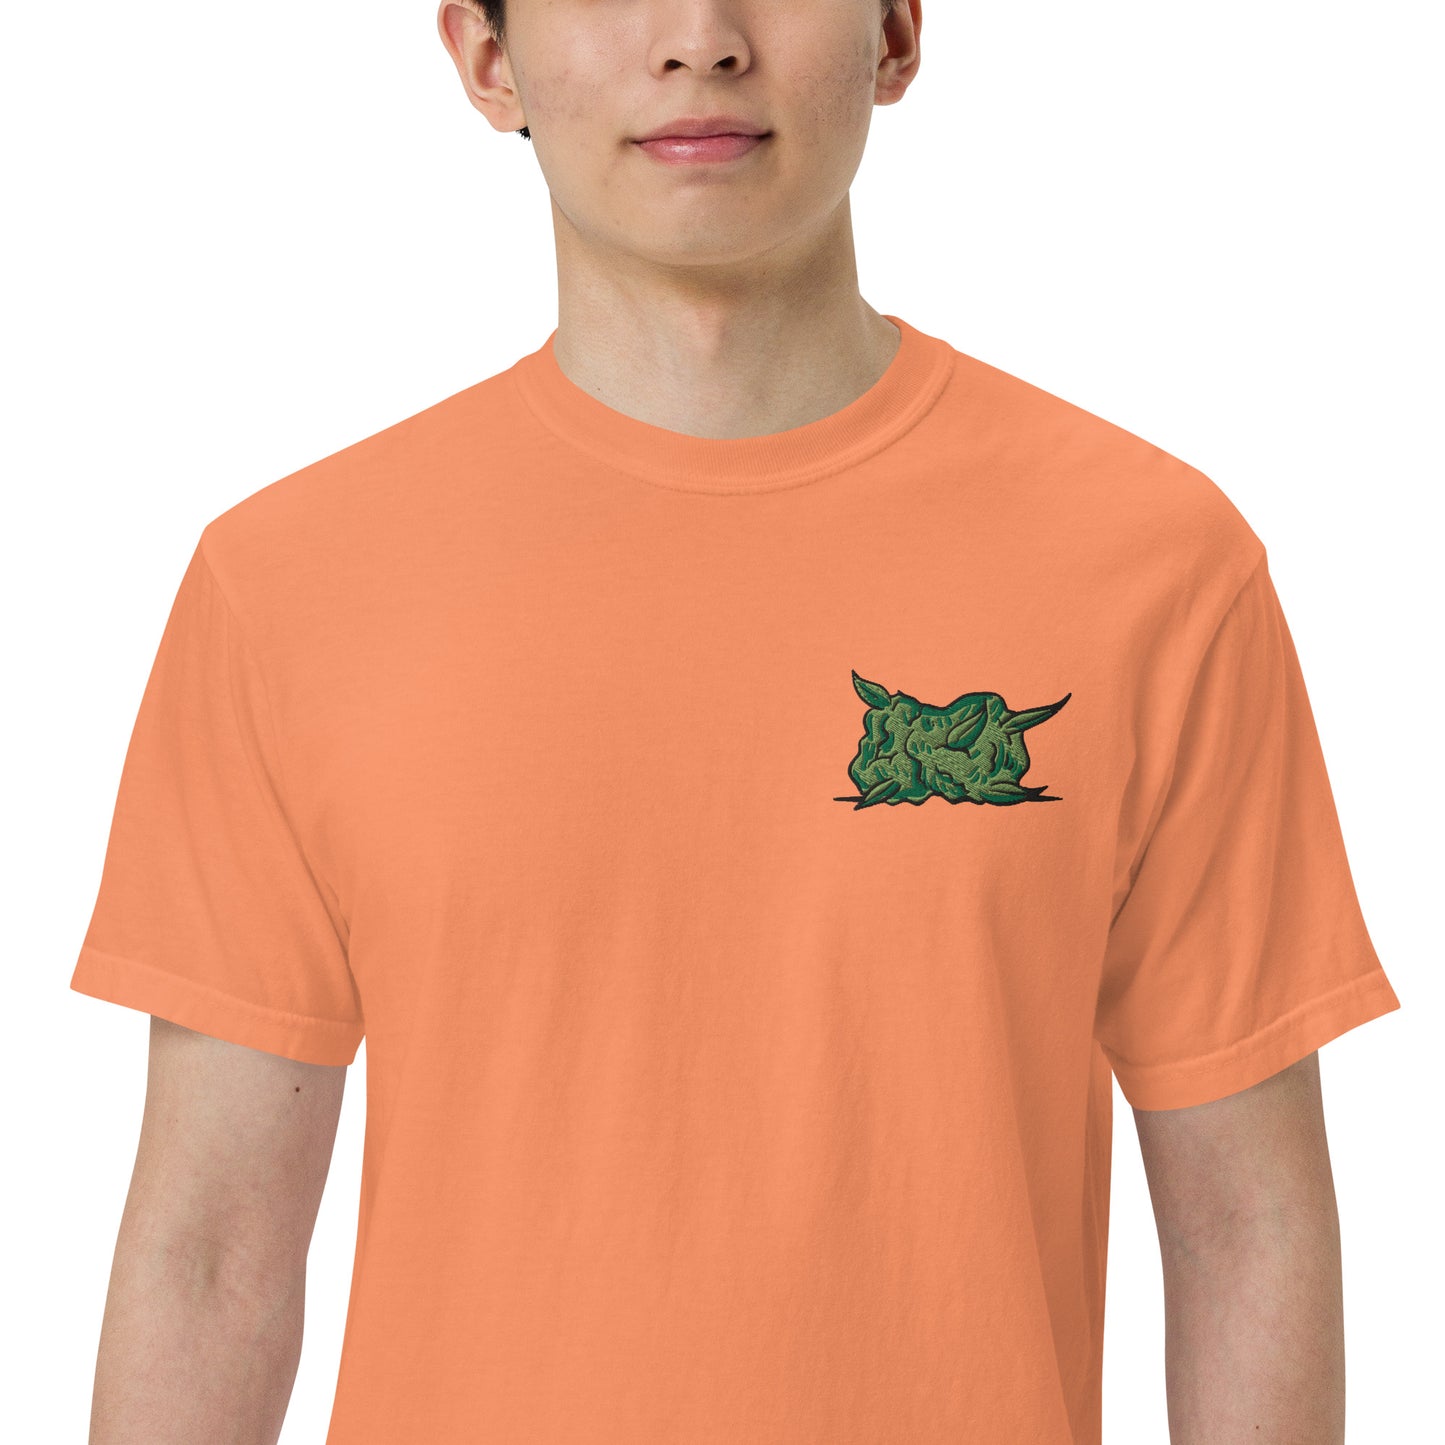 "Nug" Embroidered Garment-Dyed Heavyweight Tee